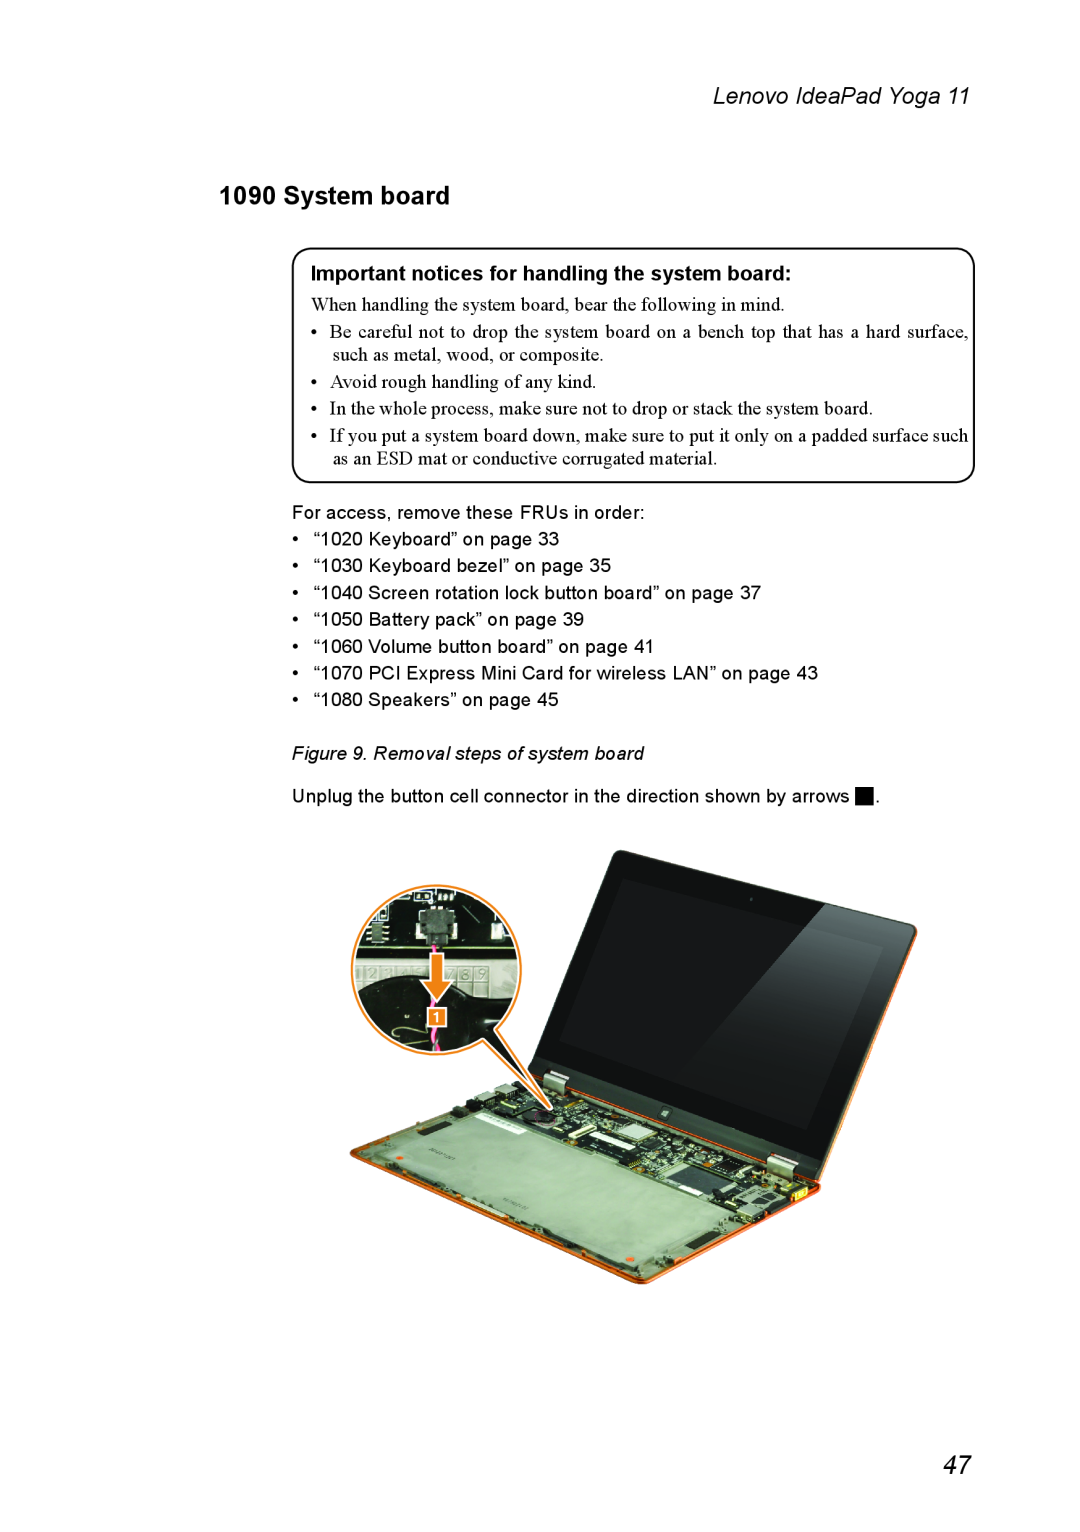 Lenovo 11 manual System board, Important notices for handling the system board, Removal steps of system board 